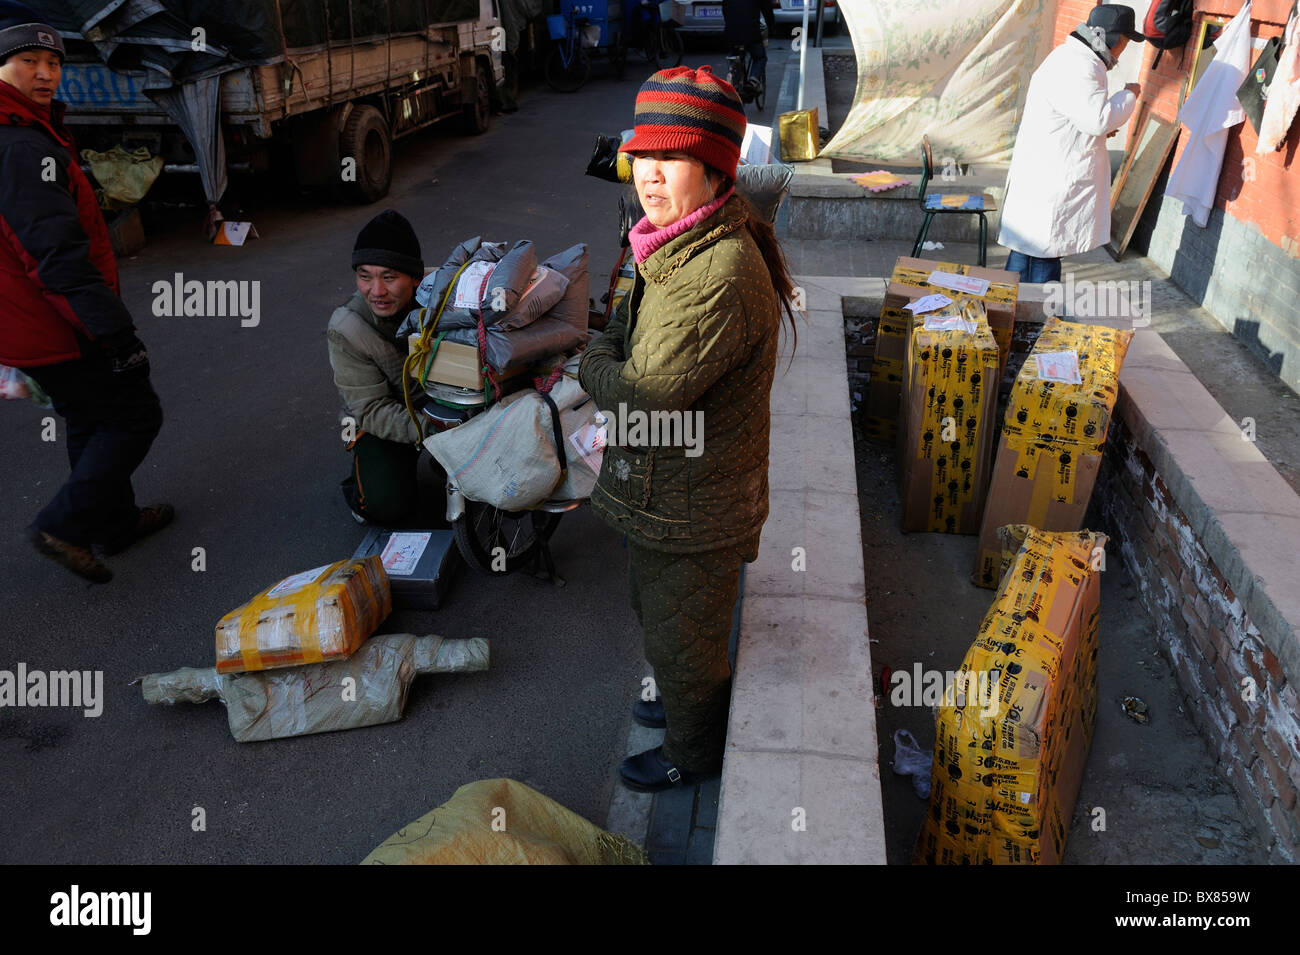 Couriers of local Shentong Express get packages on a motor tricycle to be delivered at a sub-station in Beijing, China. 2010 Stock Photo